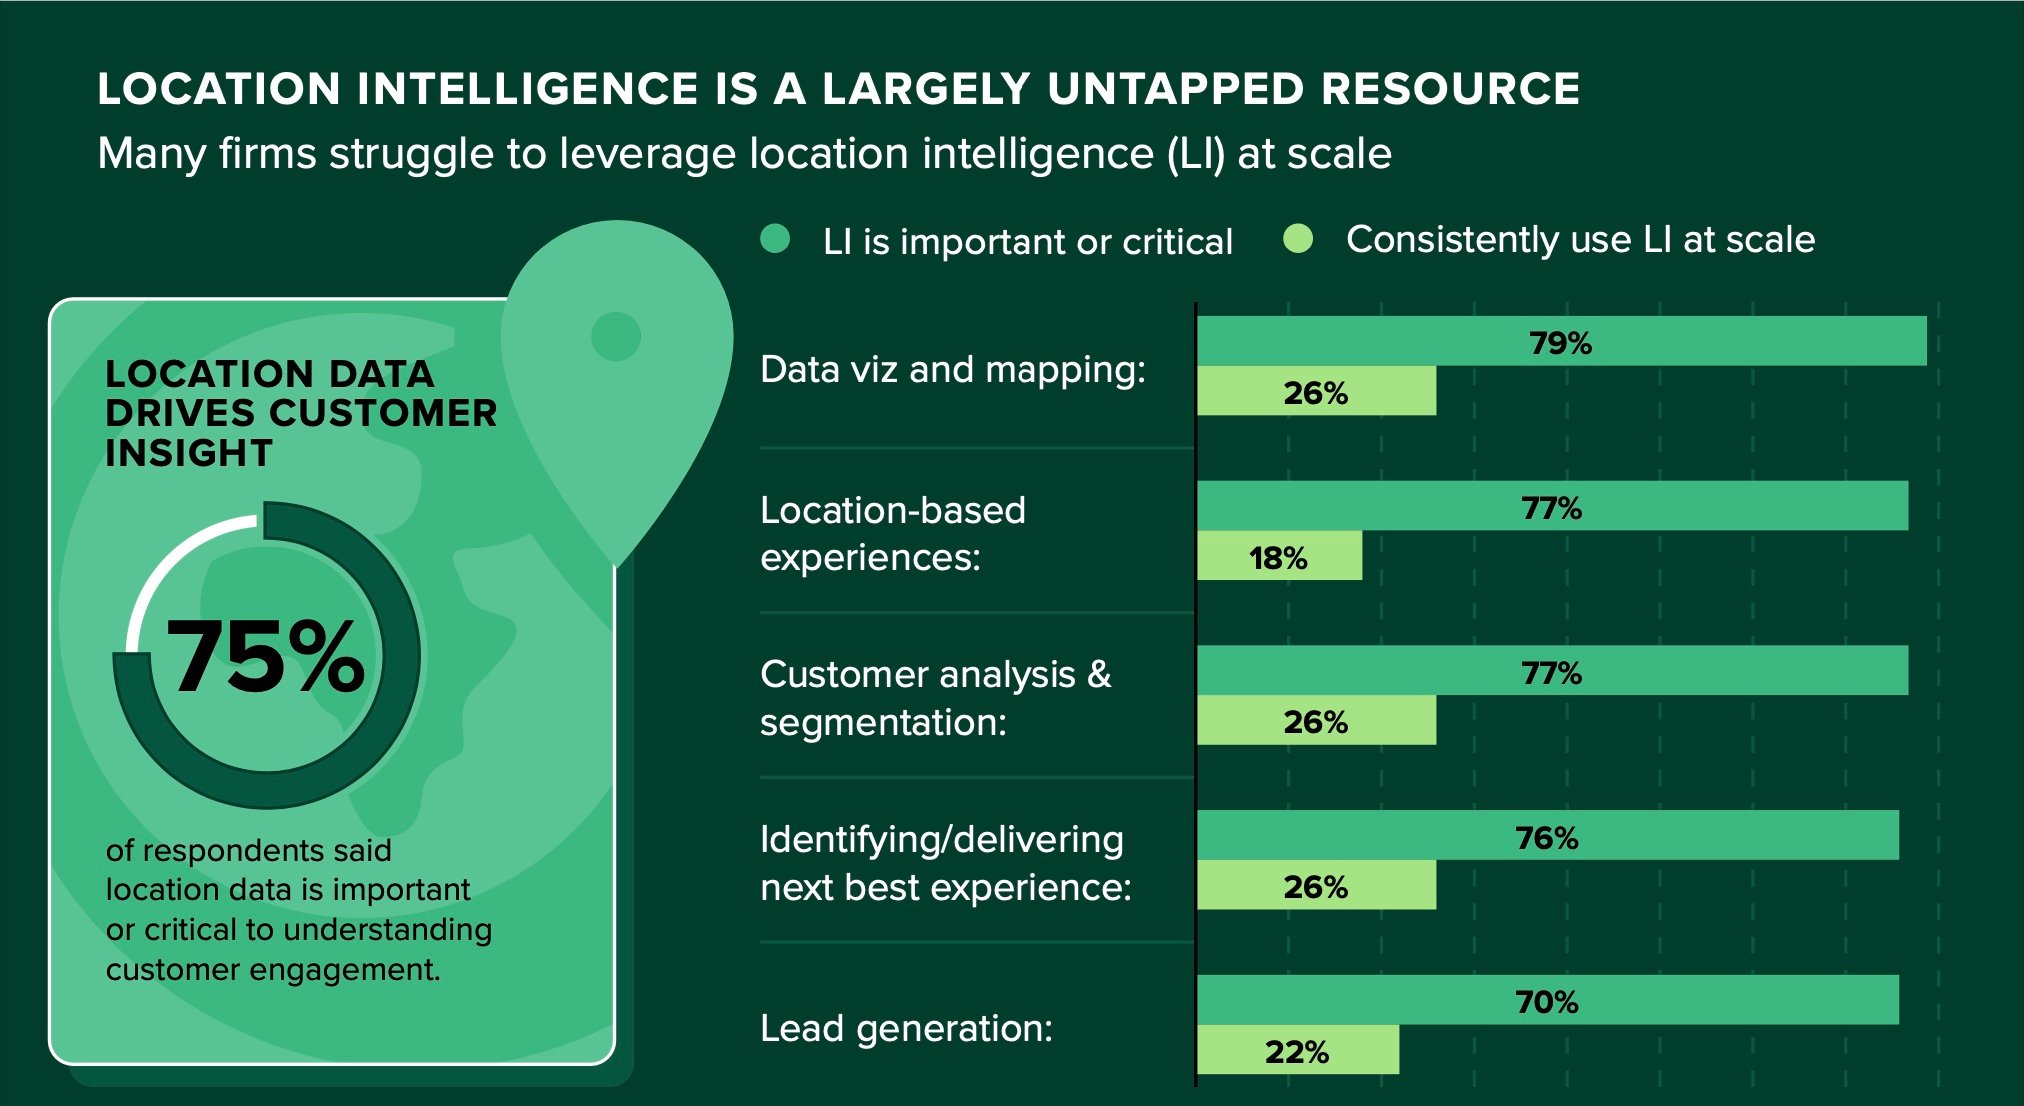 Chart depicting location intelligence as an untapped resource